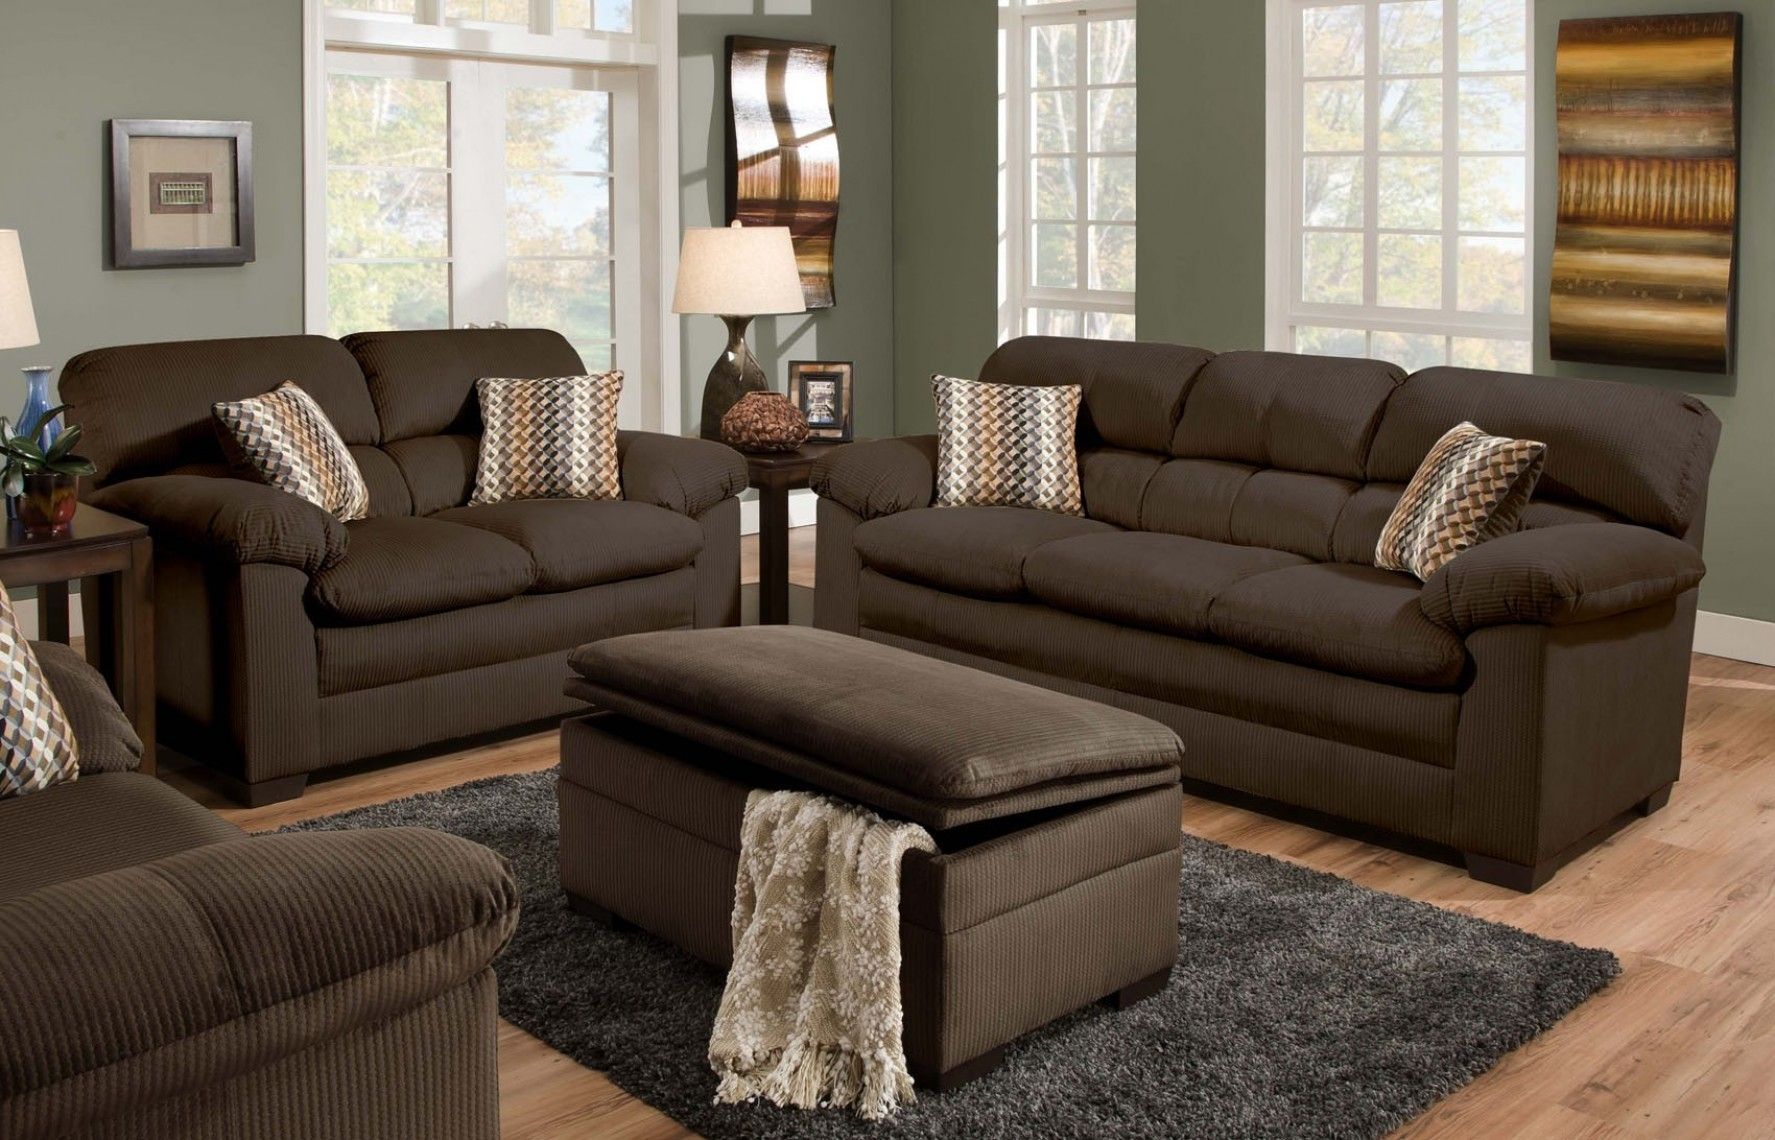 Cappuccino Sectional Sofa Set Having Pillow Arms Details Also Inside Sofas With Ottoman (Photo 8 of 10)